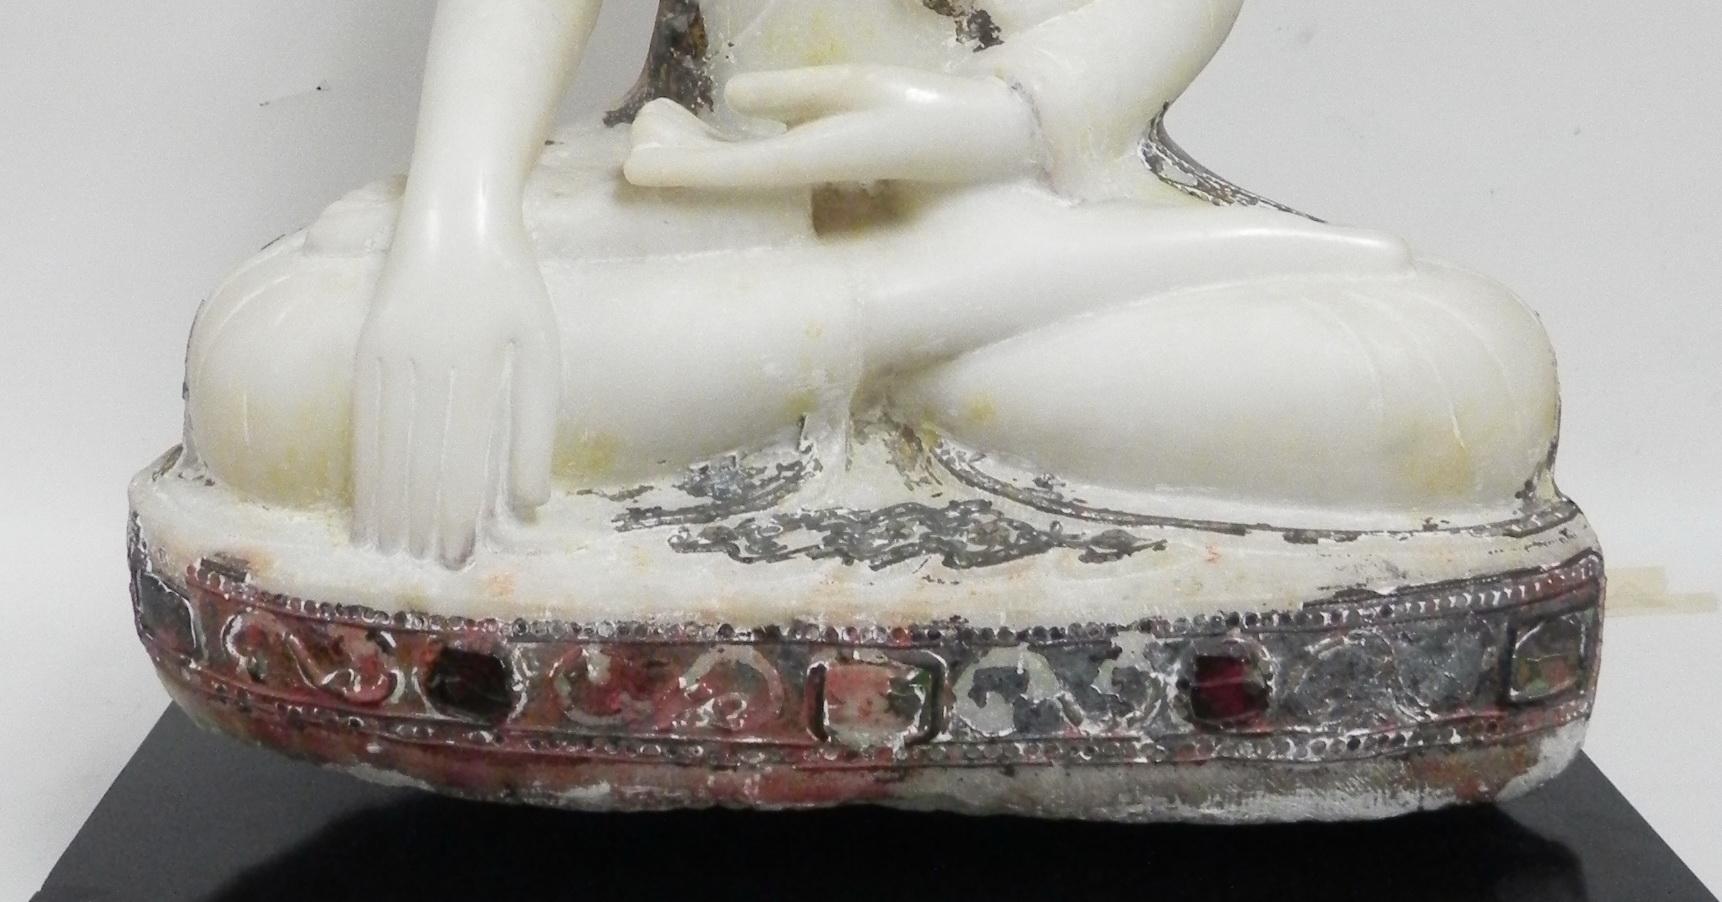 Hand-Carved Antique Burmese Marble Seated Buddha Sculpture, Mandalay, Lacquer&Glass Remains